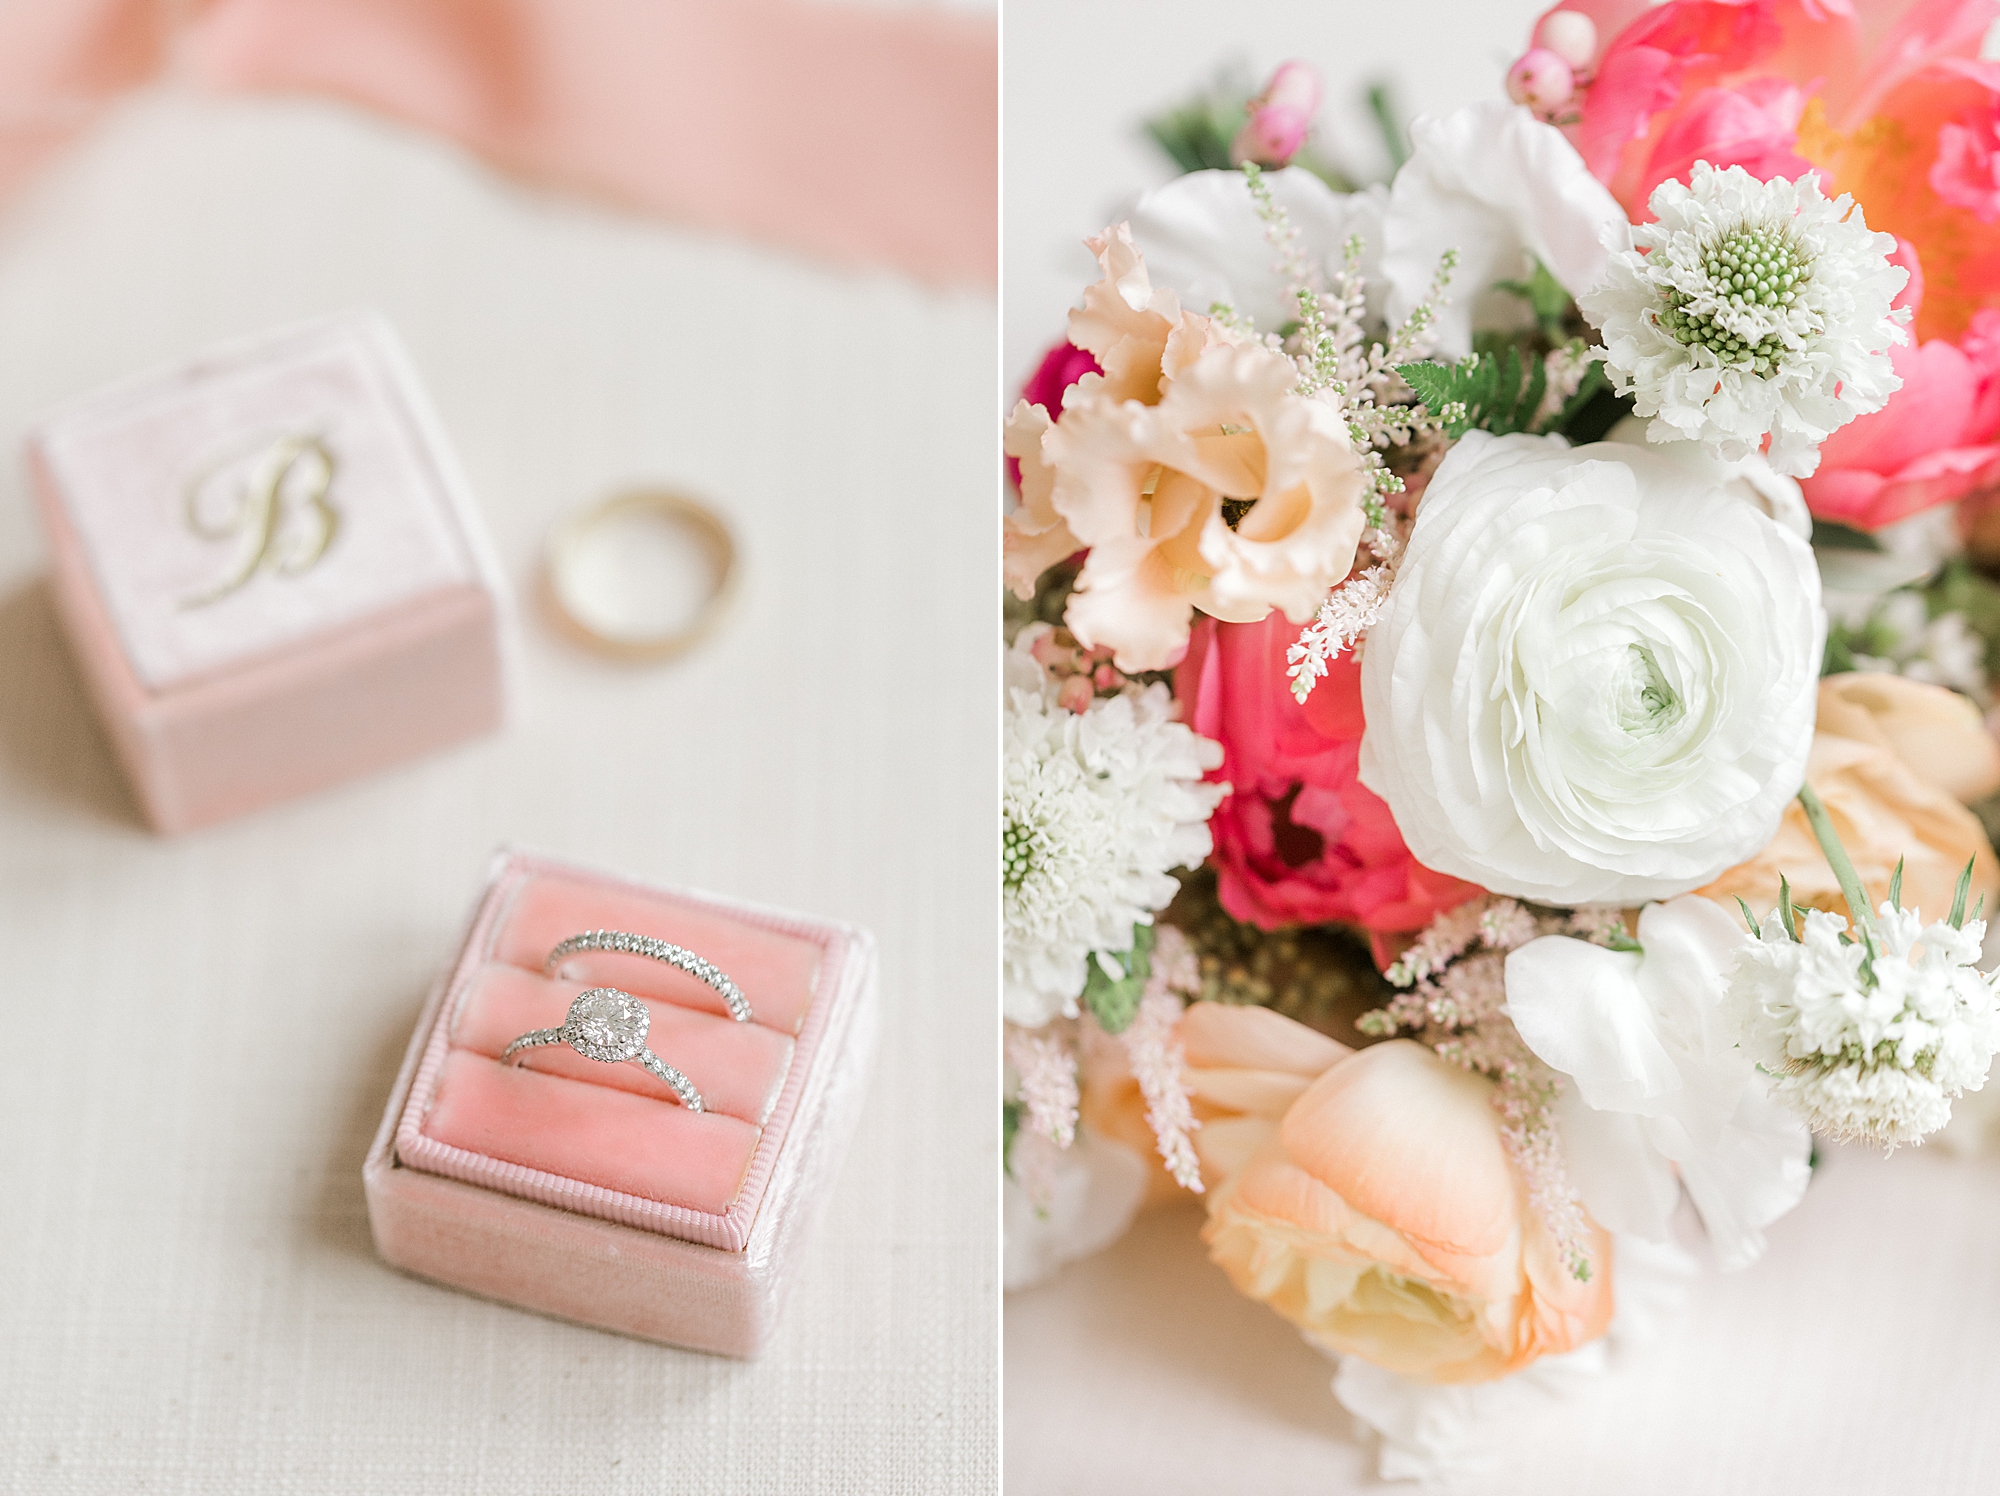 wedding jewelry in pink ring box with bouquet of white and orange flowers